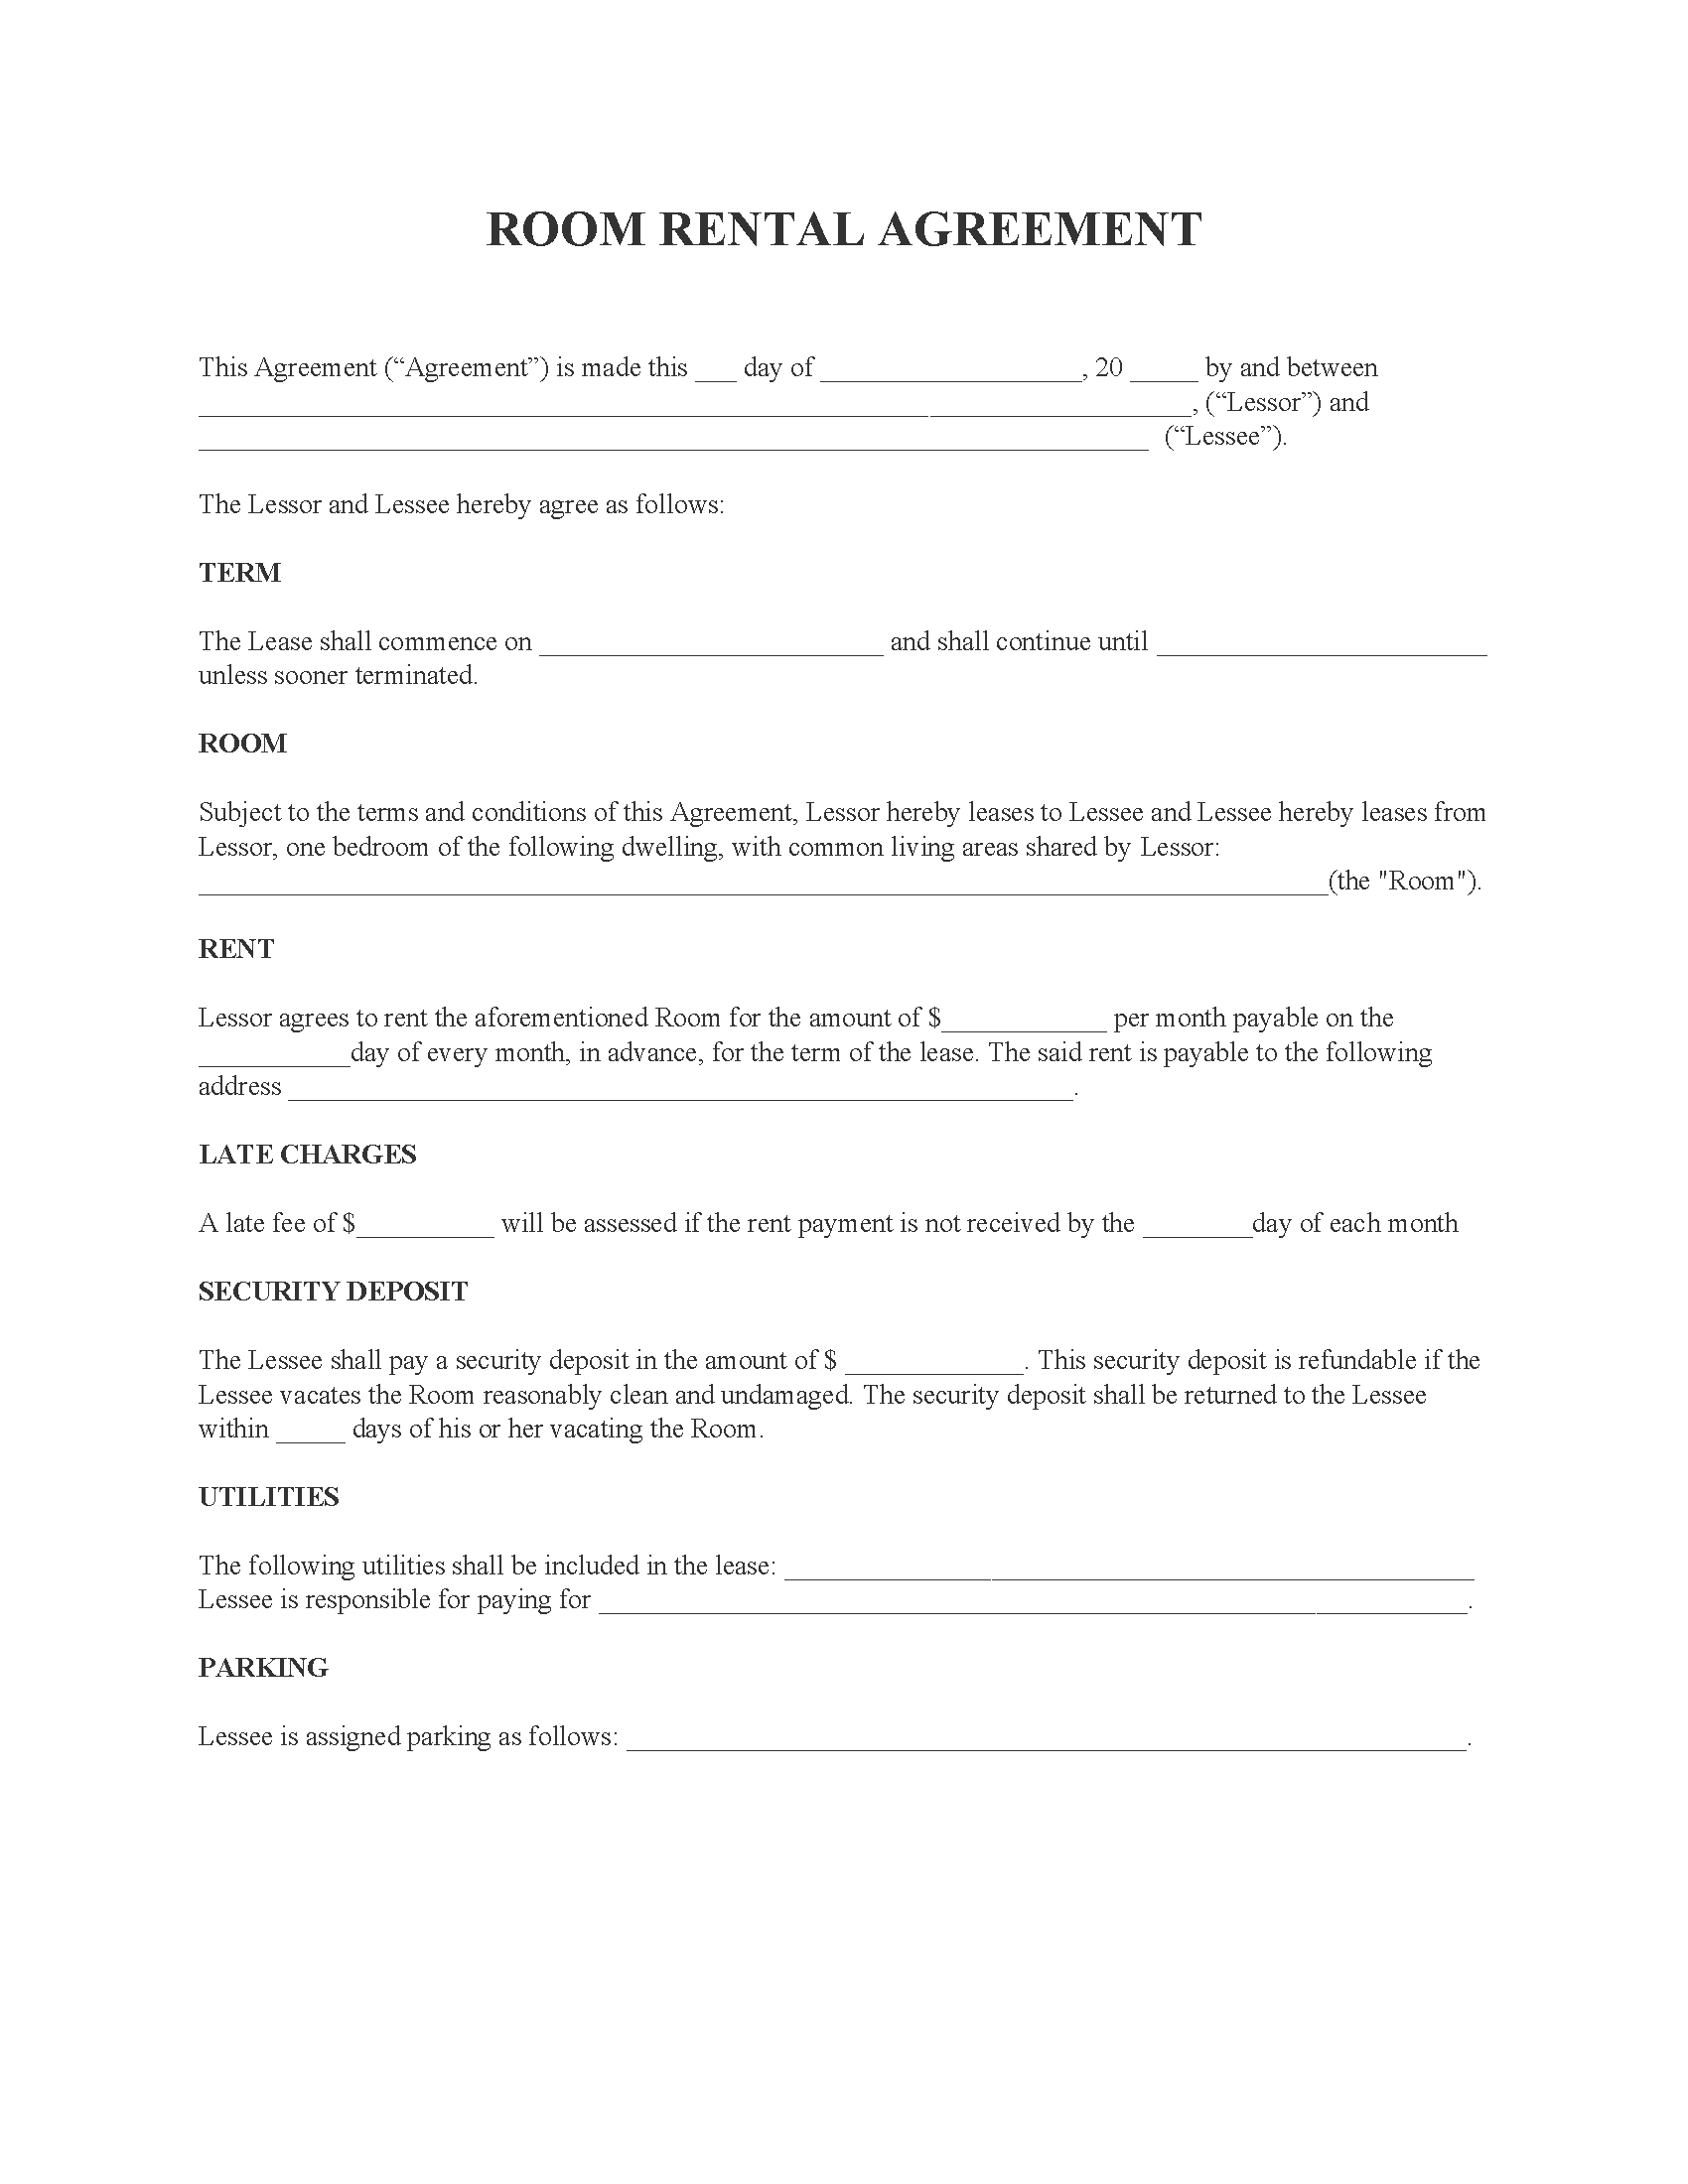 room-rental-agreement-fillable-pdf-free-printable-legal-forms